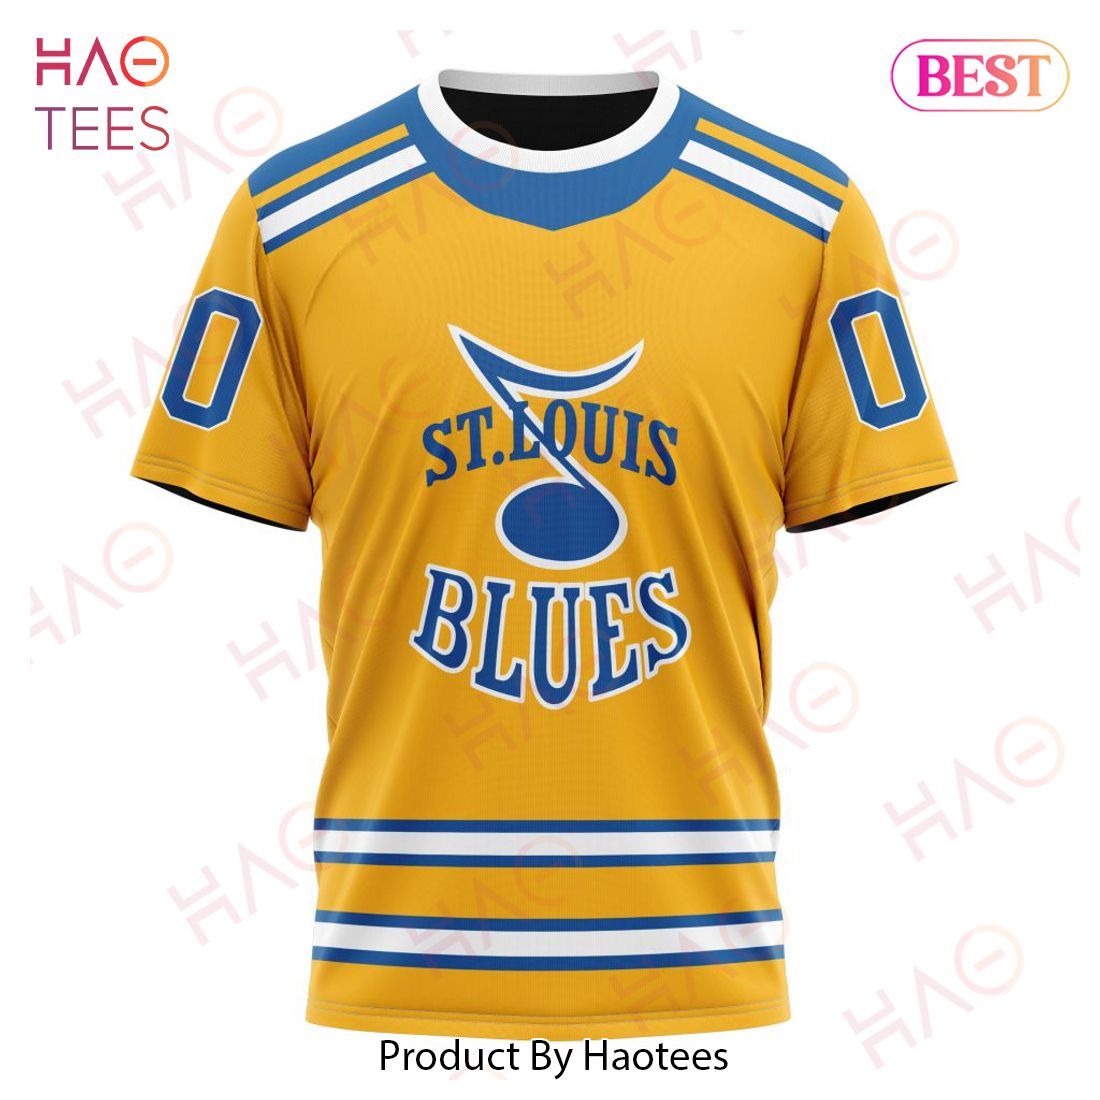 St. Louis Blues on X: 1966 meets 2022 💛 Get your #ReverseRetro